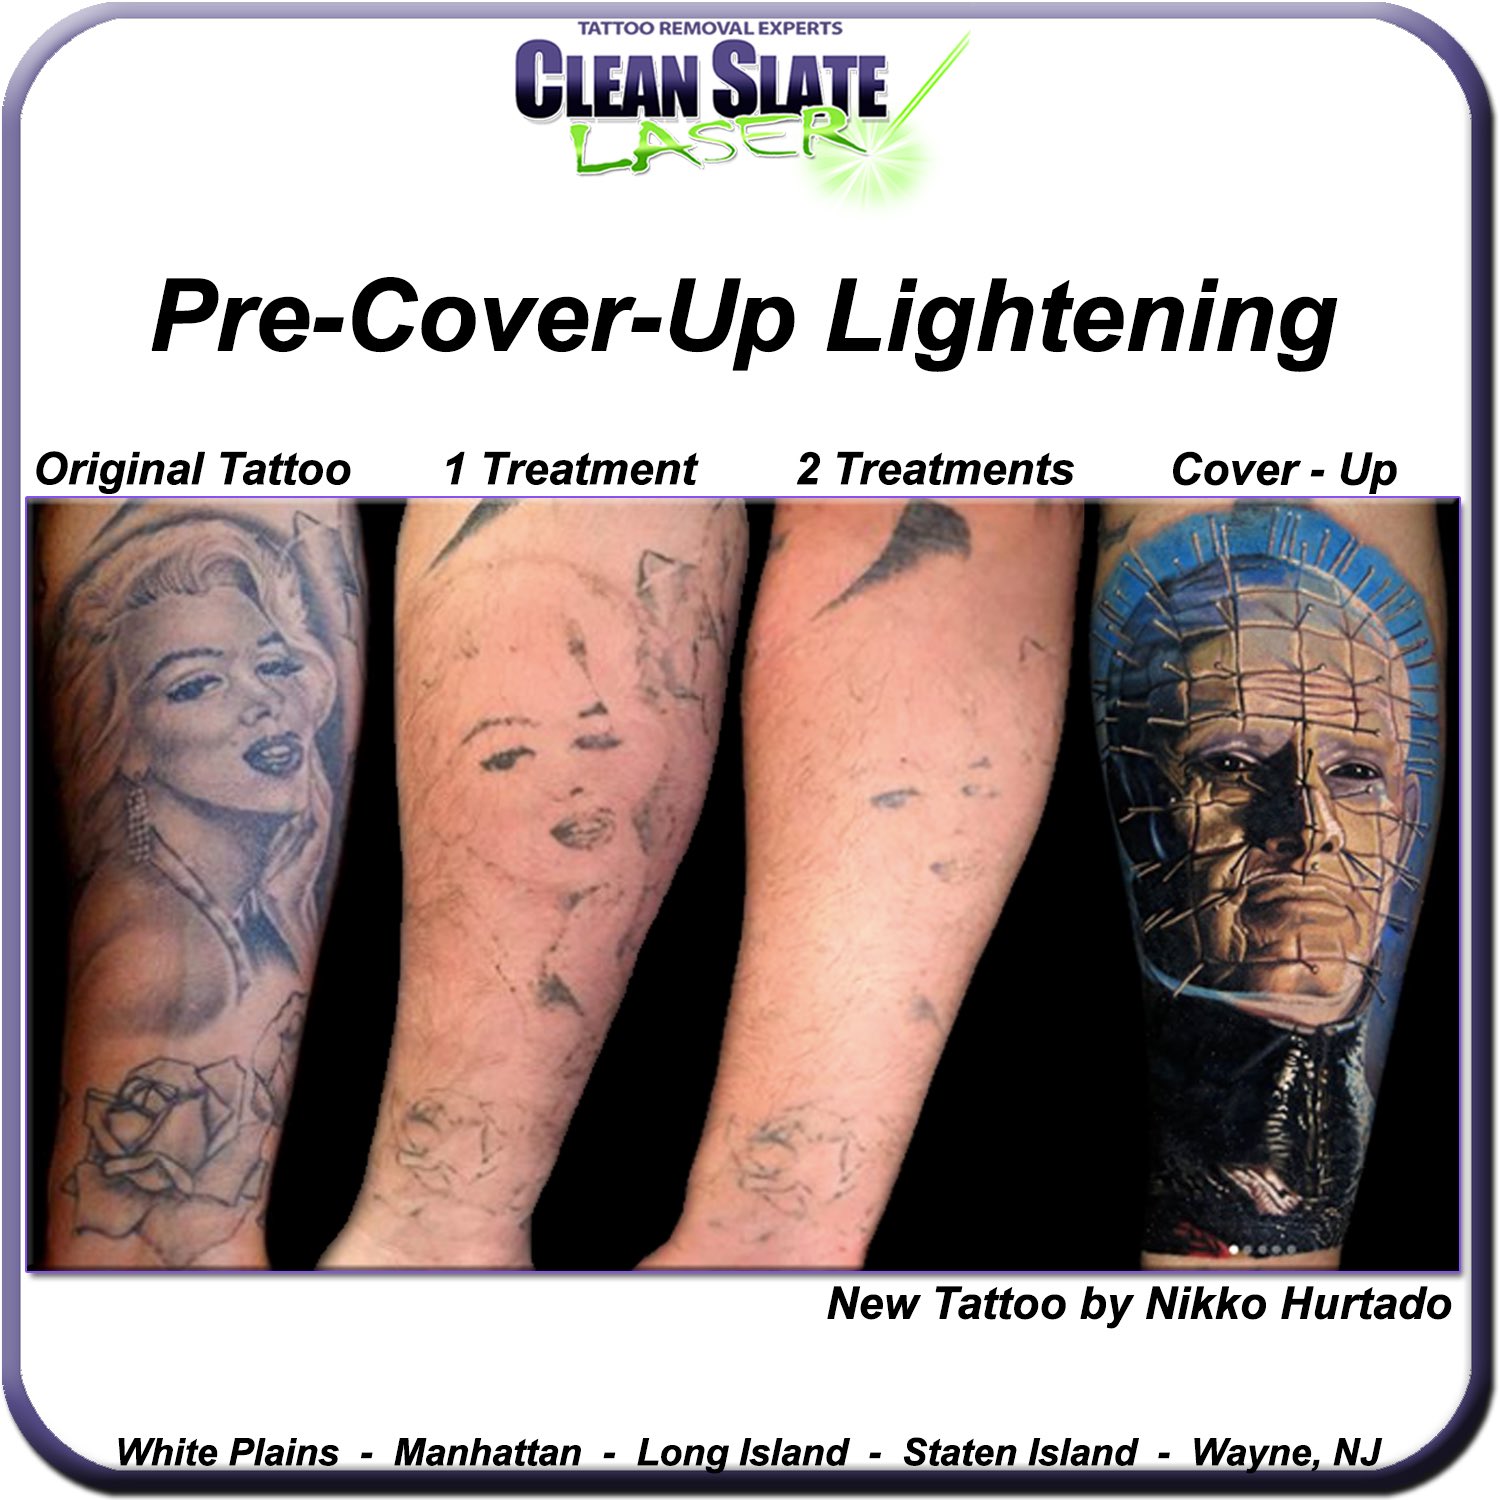 Top Tattoo Removal in Mumbai - Best Permanent Tattoo Removal - Justdial